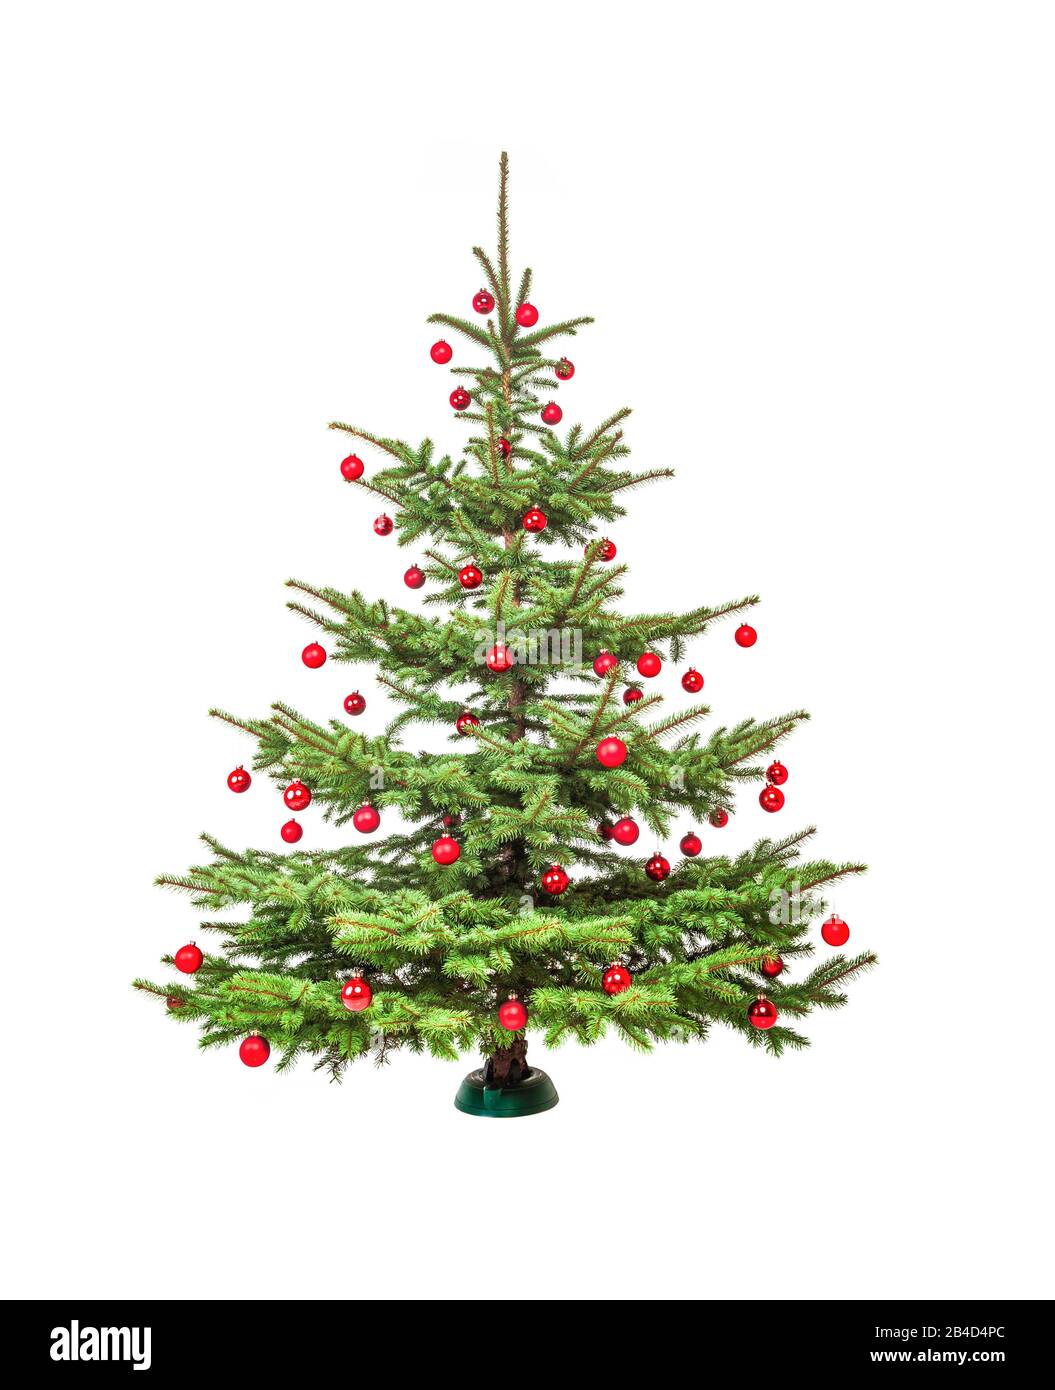 Beautifully decorated Christmas tree with red Christmas baubles Stock Photo